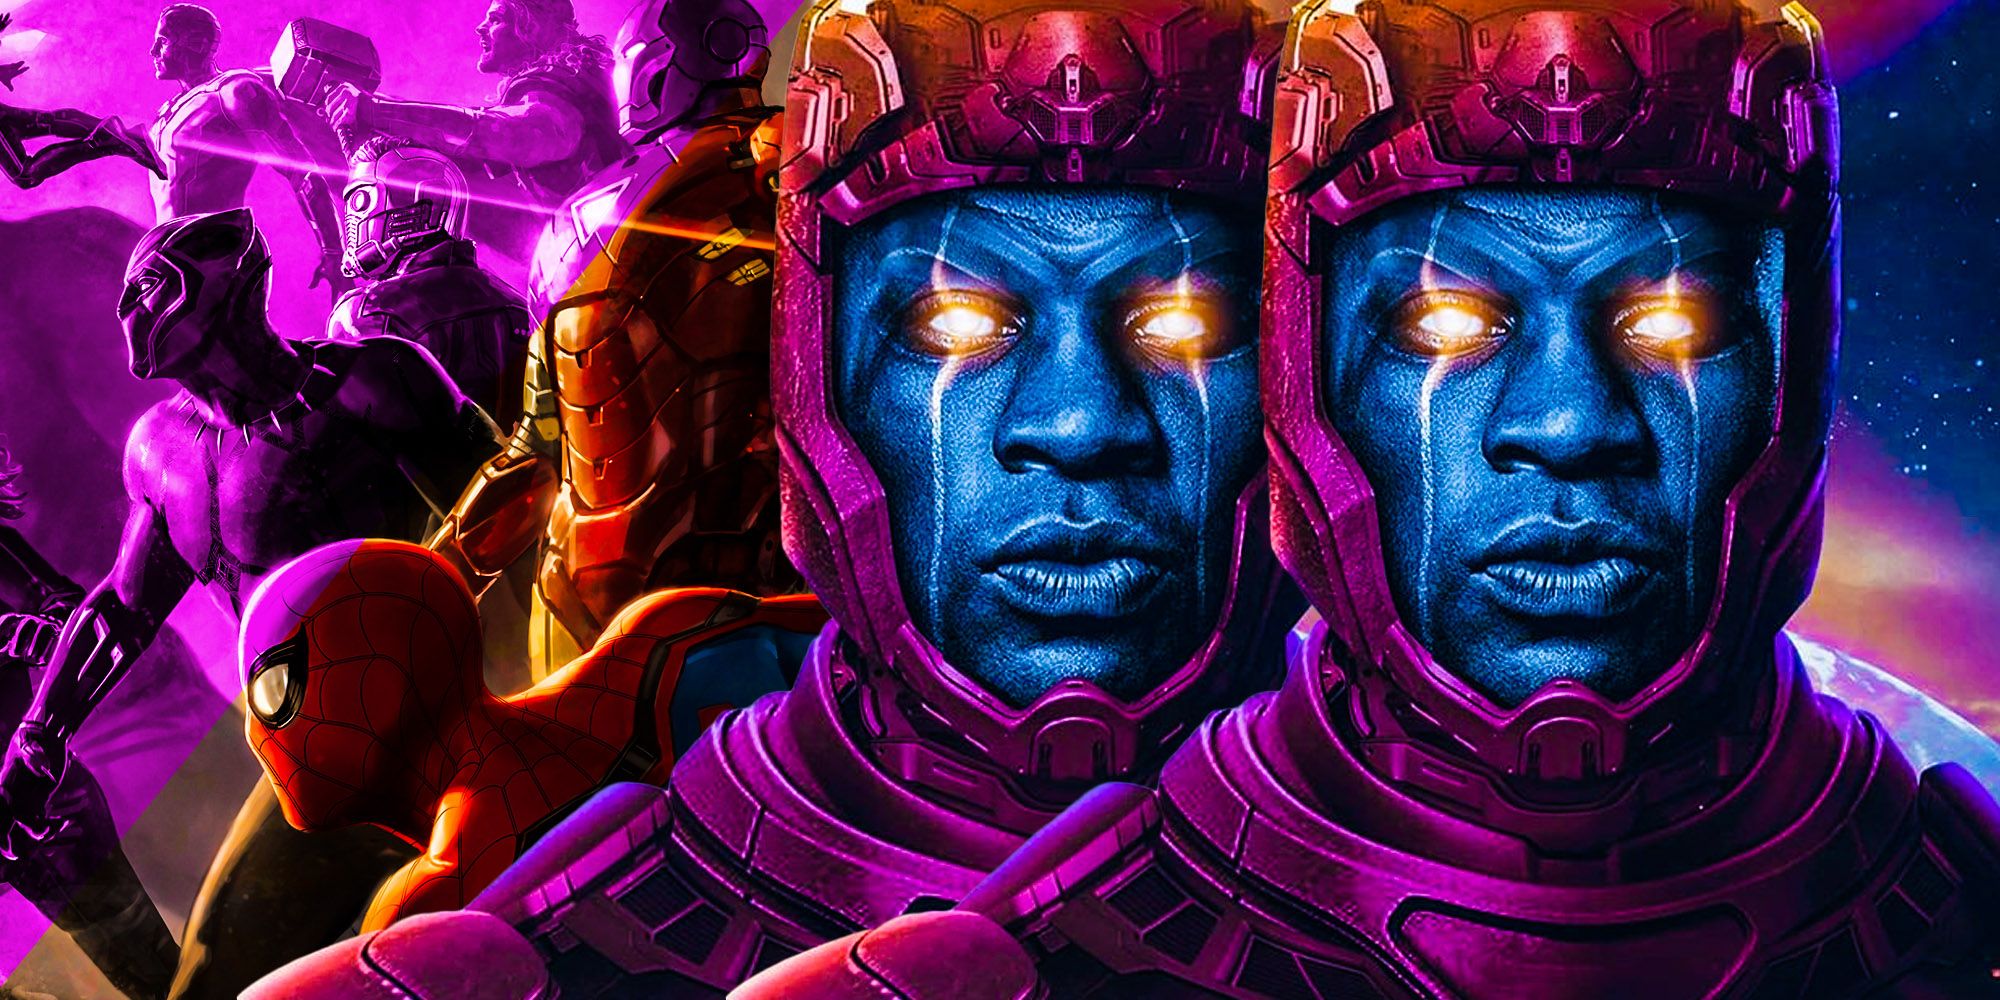 Two versions Variants of Kang in Marvel phase 4 and 5